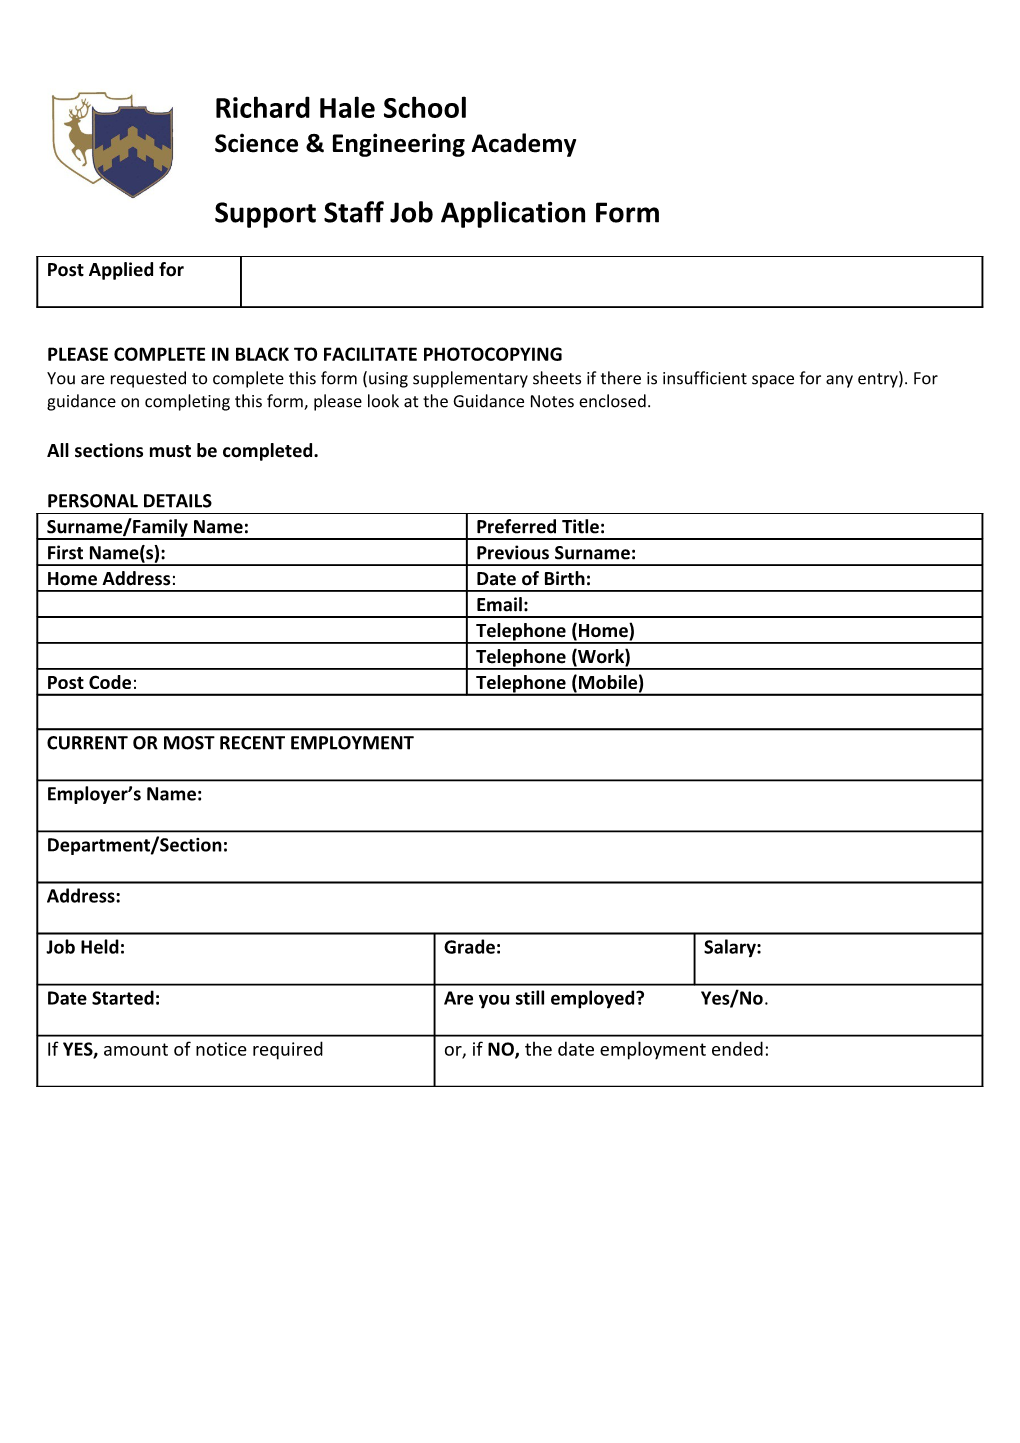 Hertfordshire County Council Job Application Form (Support Staff) s2